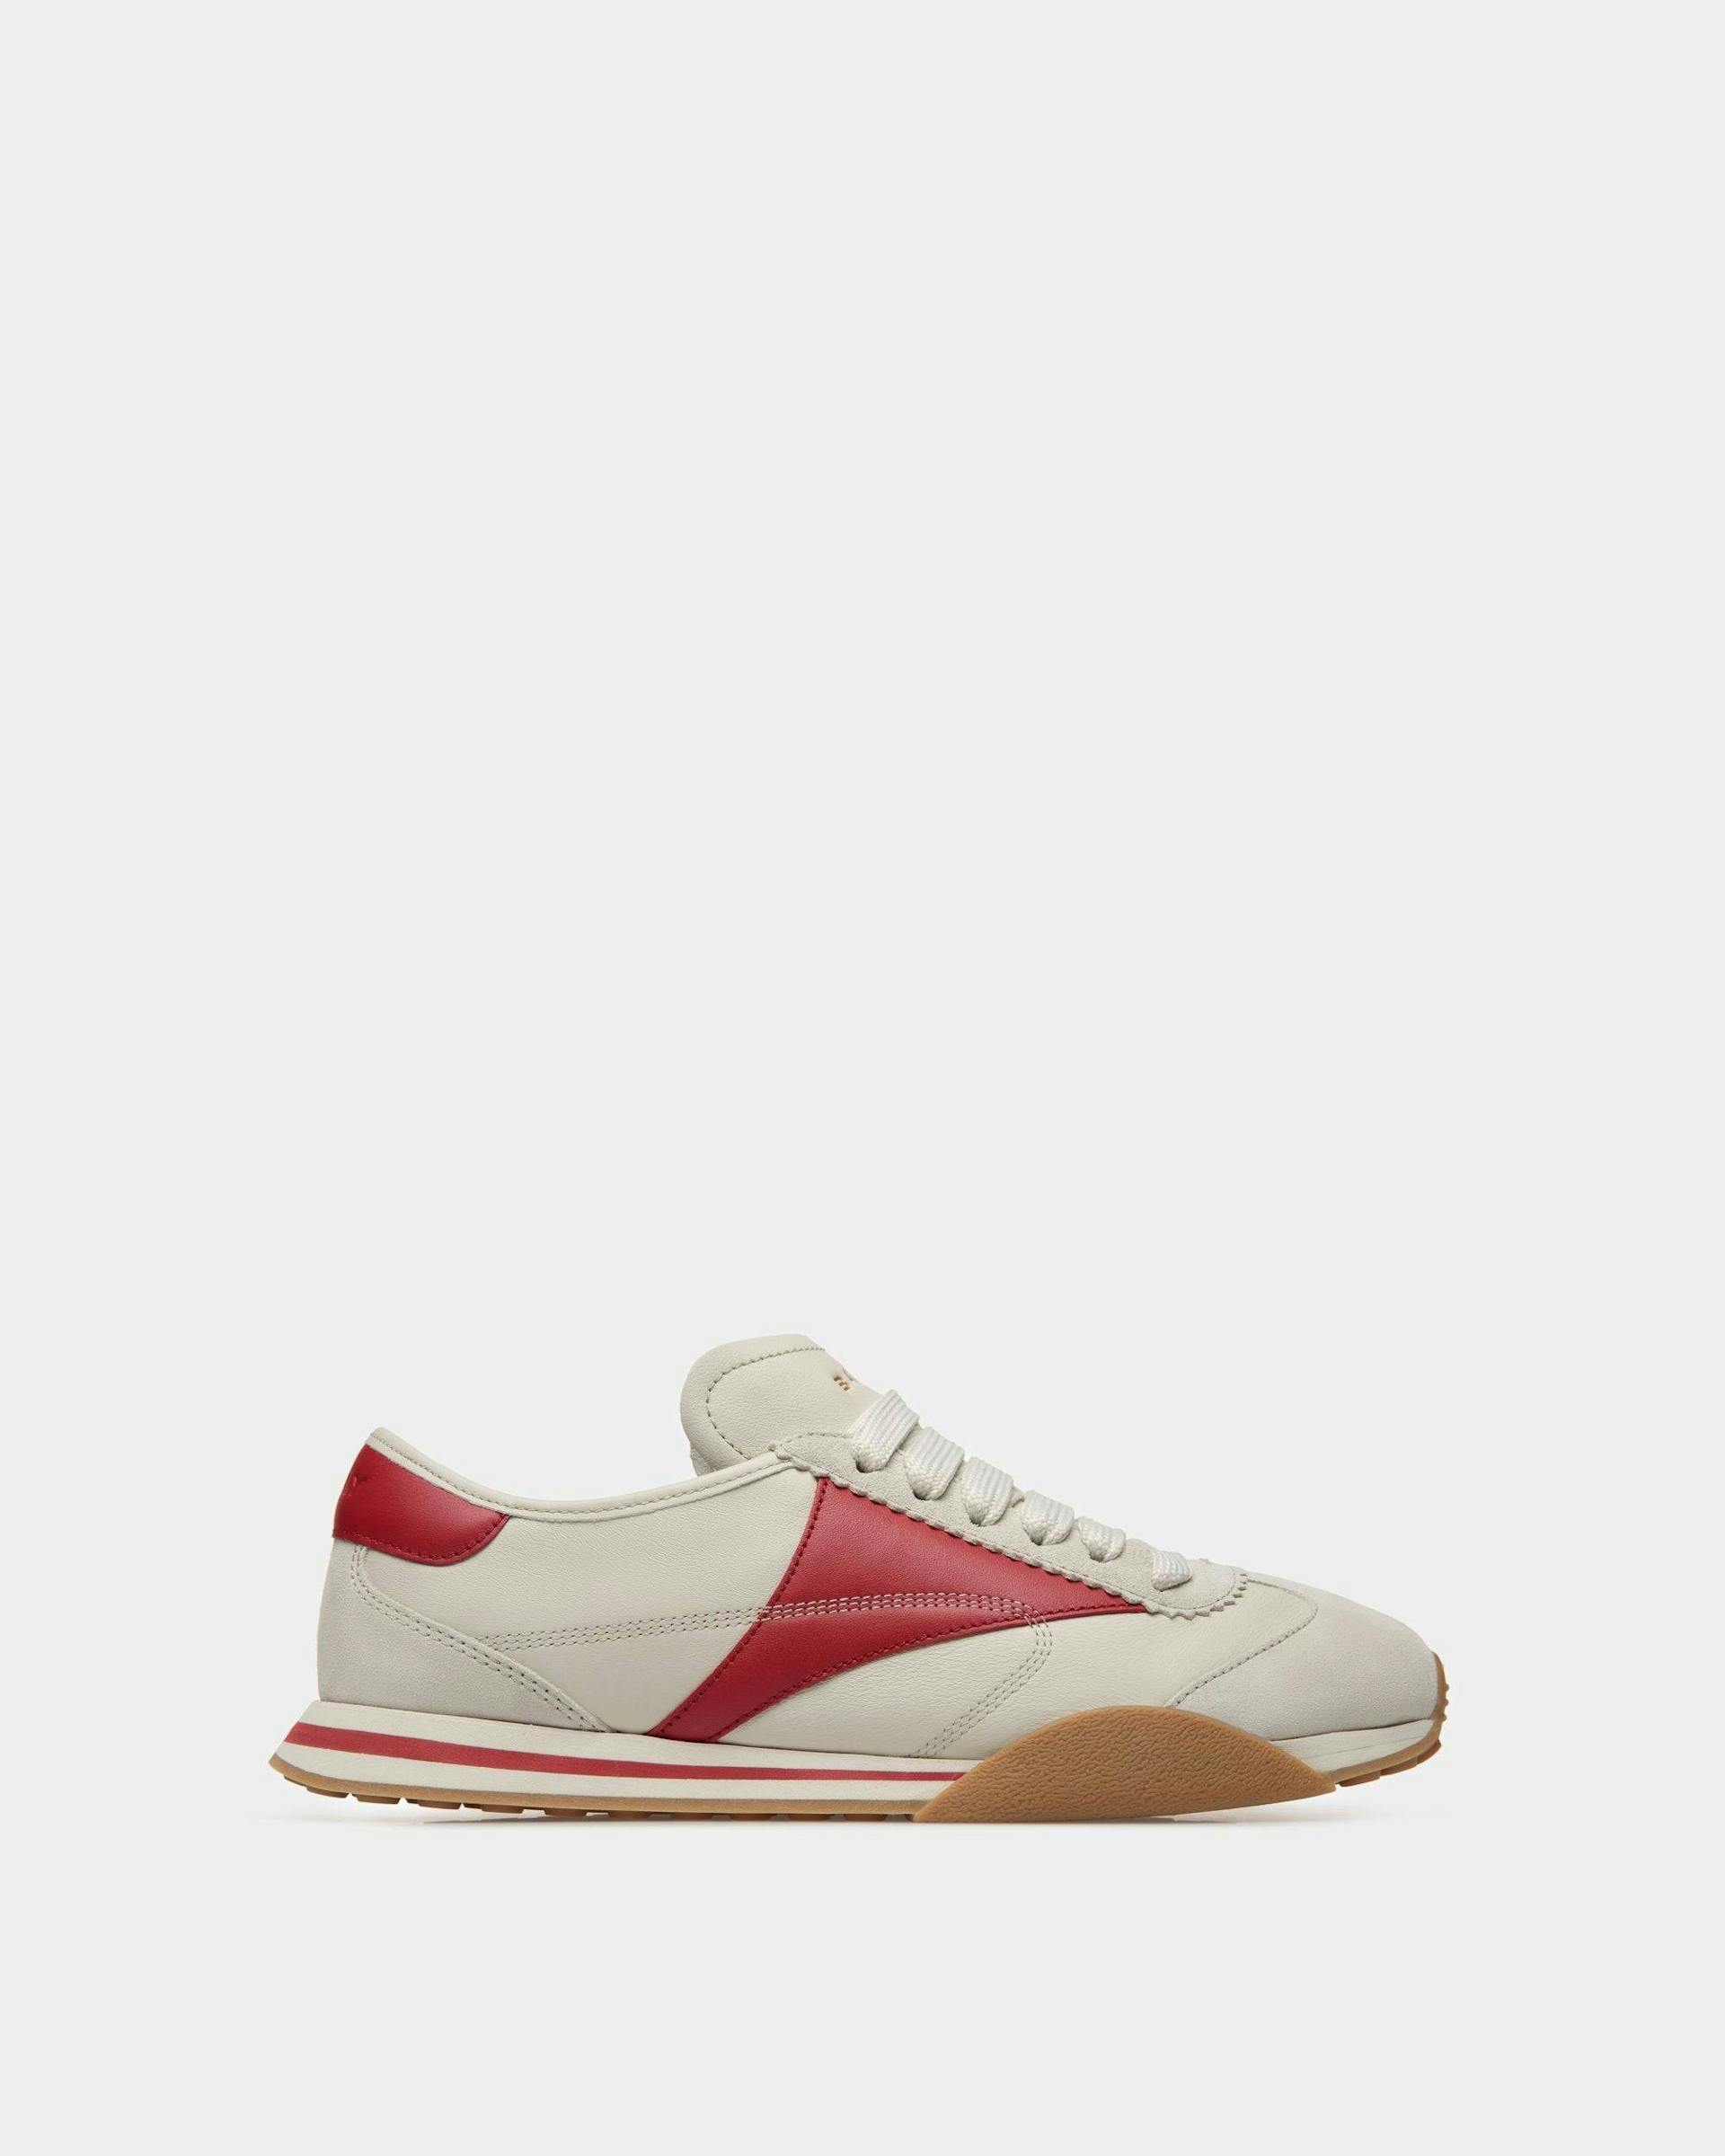 Sussex Sneakers In Dusty White And Deep Ruby Leather - Men's - Bally - 01